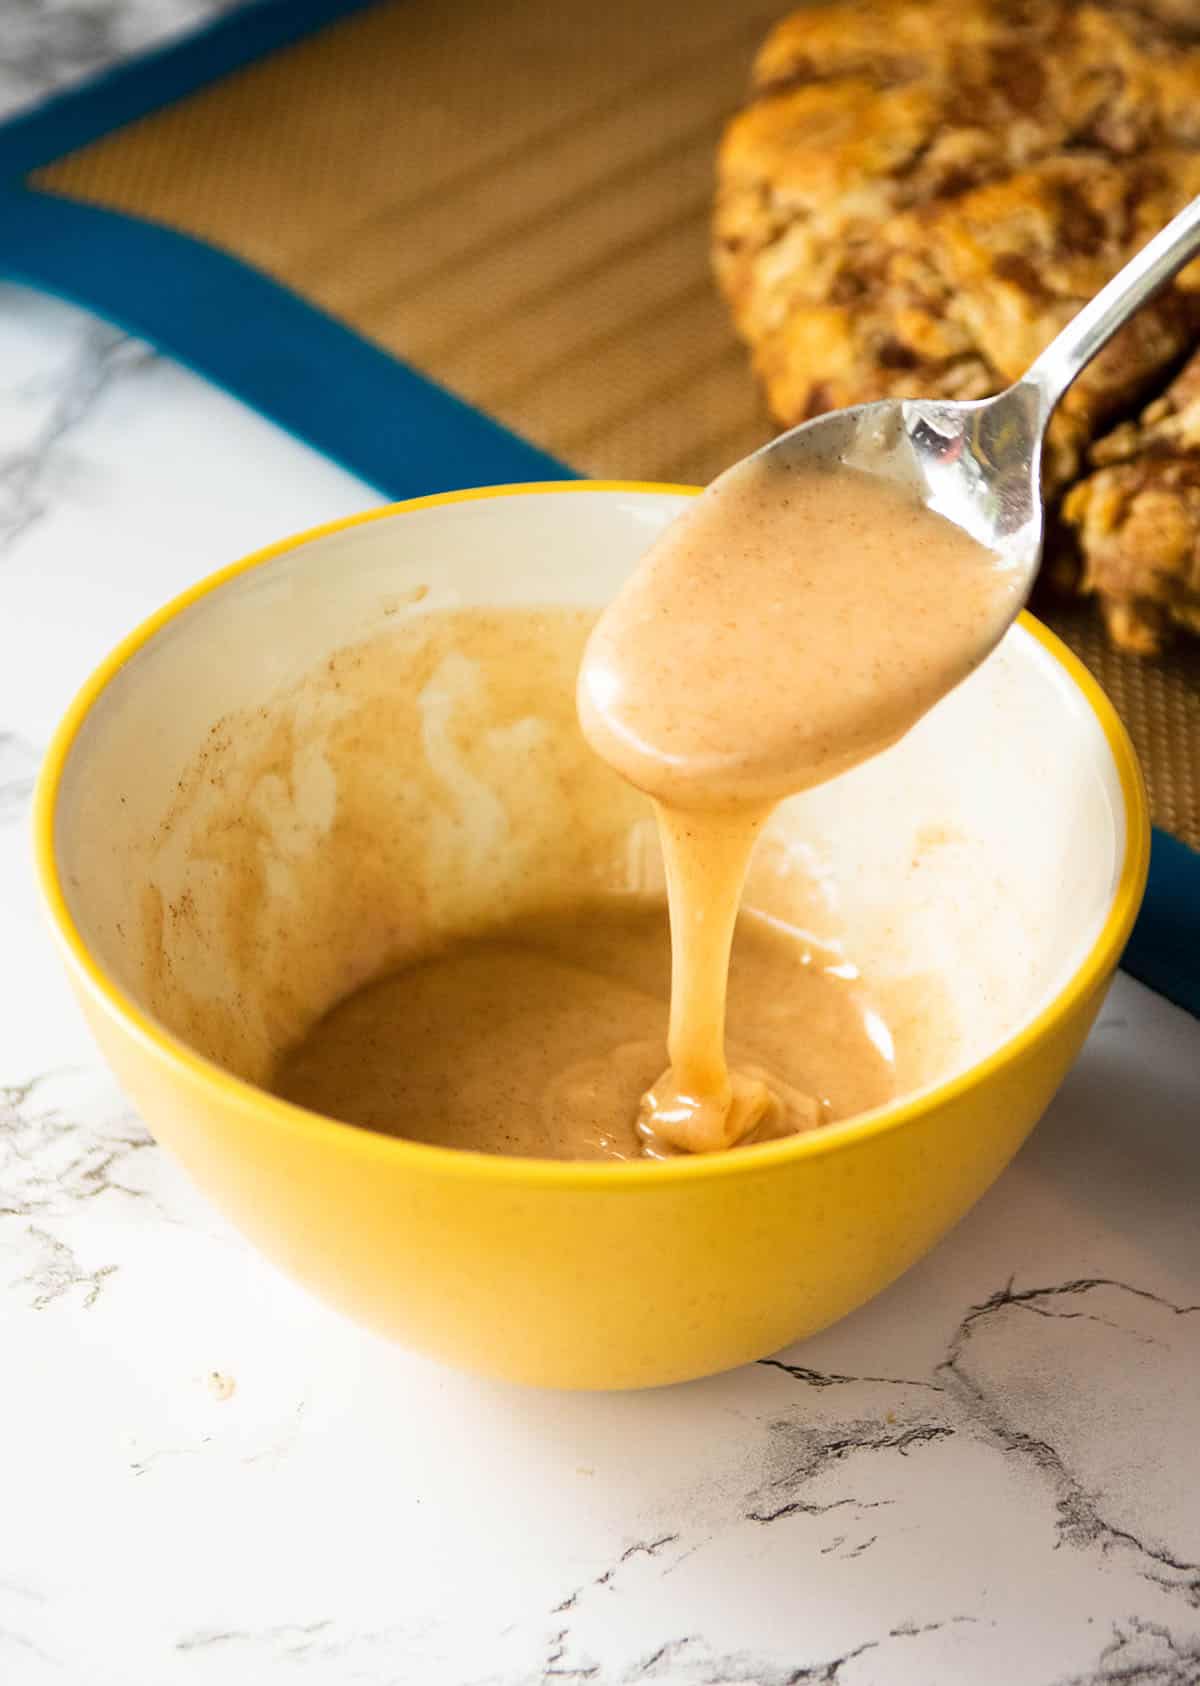 Spoon lifting a scoop of cinnamon glaze out of a yellow bowl.